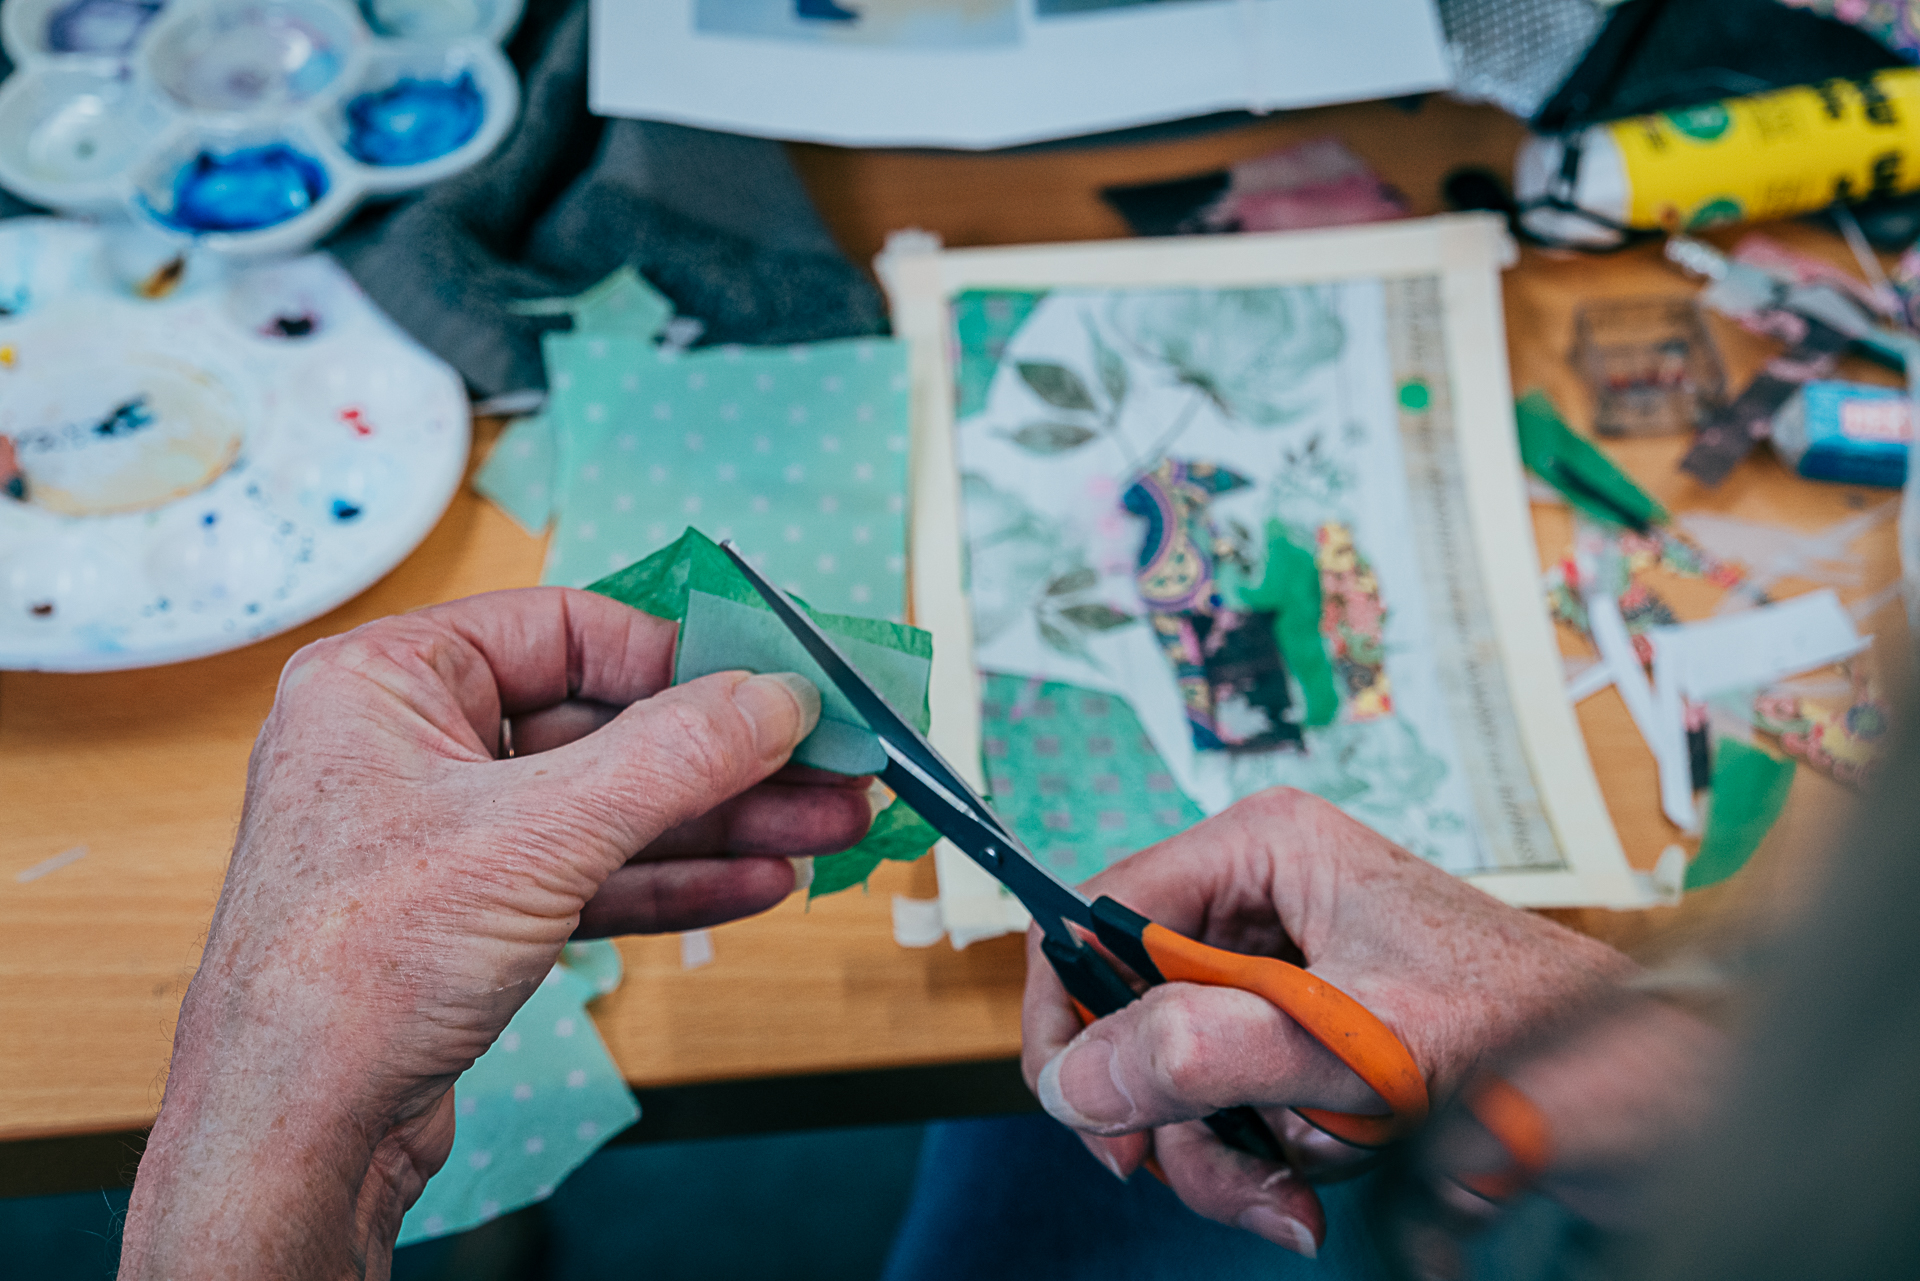 Person holding orange handled scissors cutting green paper above an in progress collage.